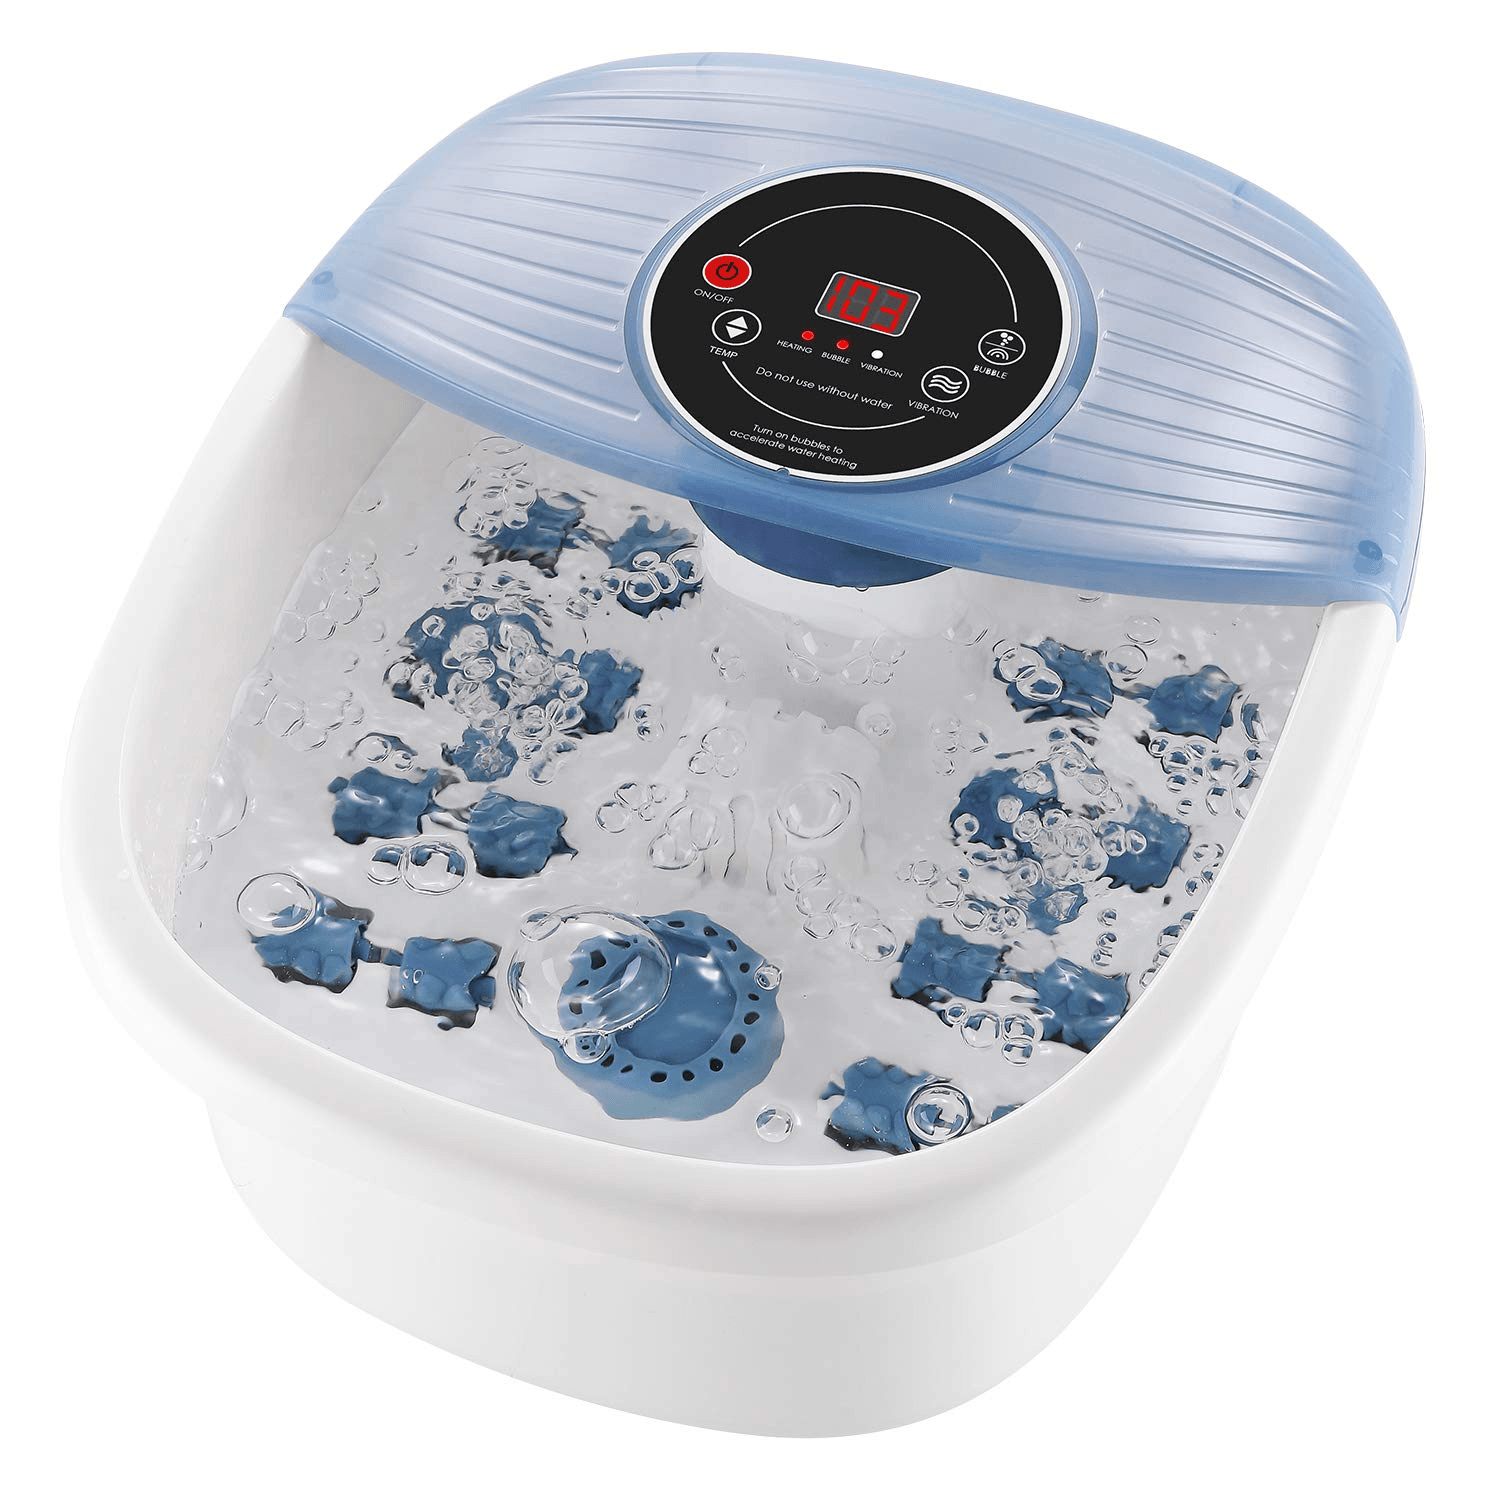 http://www.maxkare.net/cdn/shop/products/foot-spa-bath-massager-with-heat-bubbles-vibration-3-in-1-function-16-masssage-rollers-soaker-digital-temperature-control-pedicure-tub-bath-for-feet-home-use-885811.png?v=1626676705